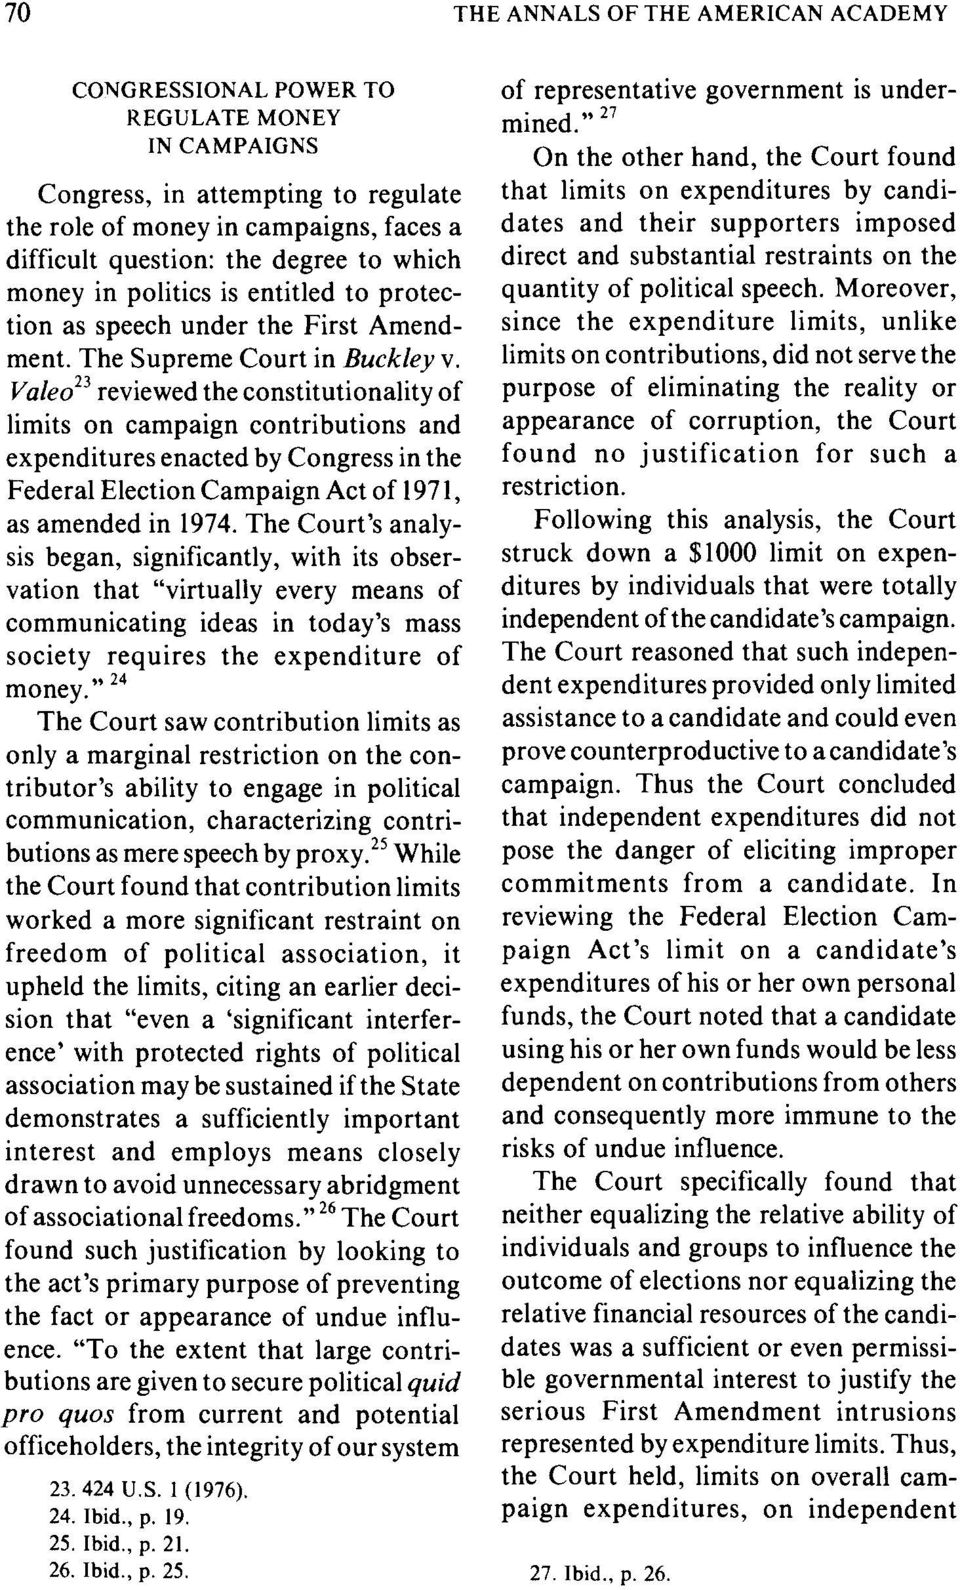 Valeo23 reviewed the constitutionality of limits on campaign contributions and expenditures enacted by Congress in the Federal Election Campaign Act of 1971, as amended in 1974.